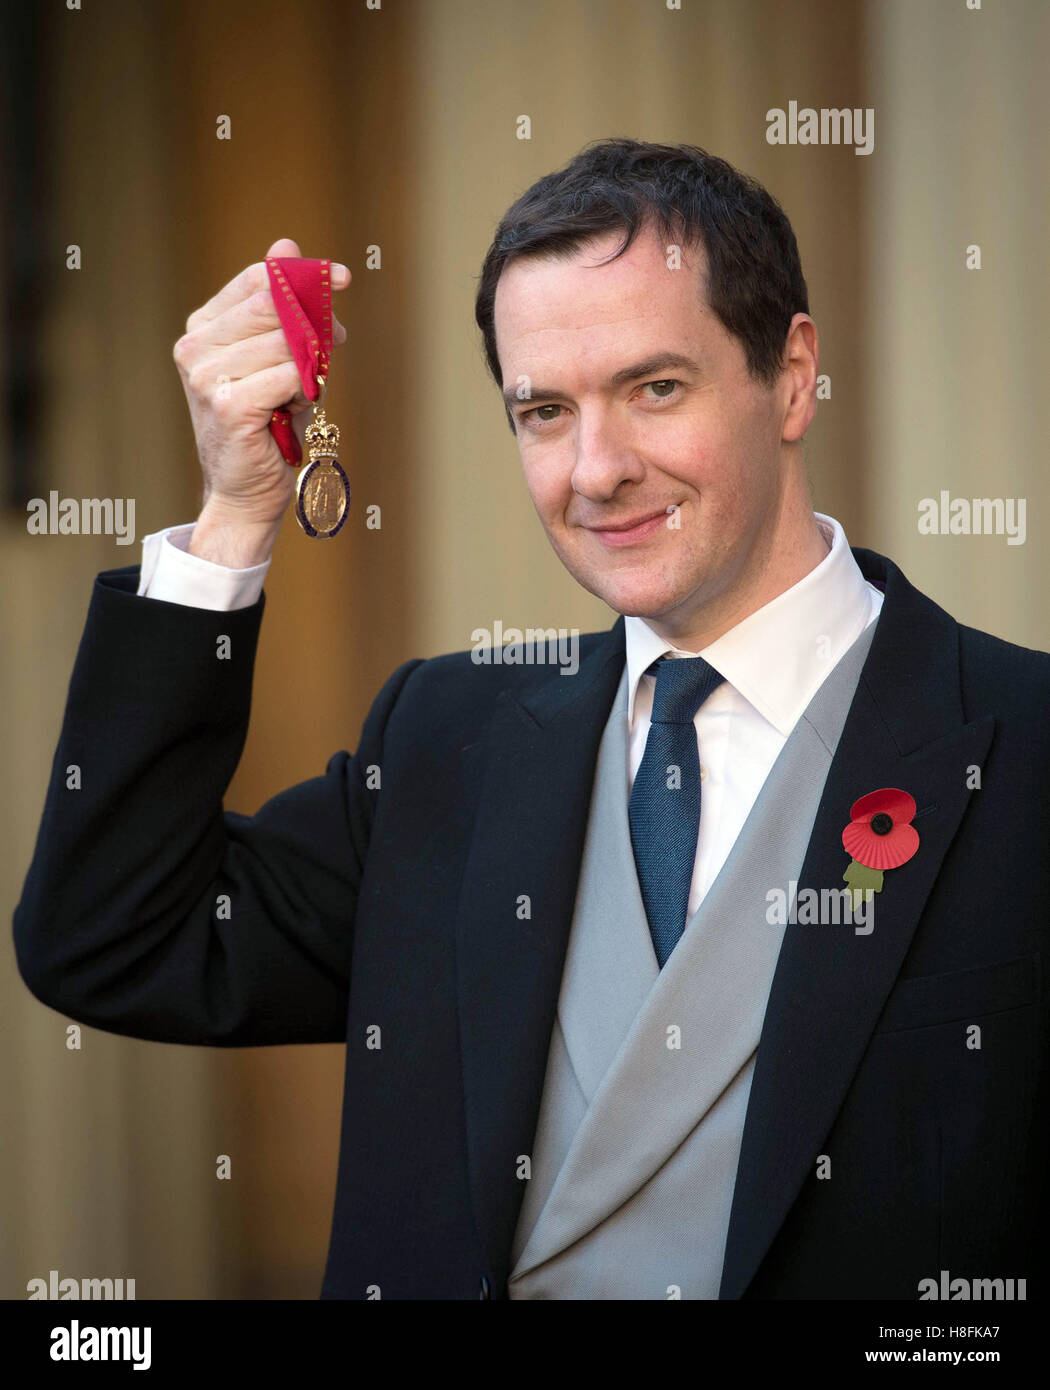 Former Chancellor George Osborne with the Order of the Companions of Honour which he received from the Duke of Cambridge at Buckingham Palace, London. Stock Photo